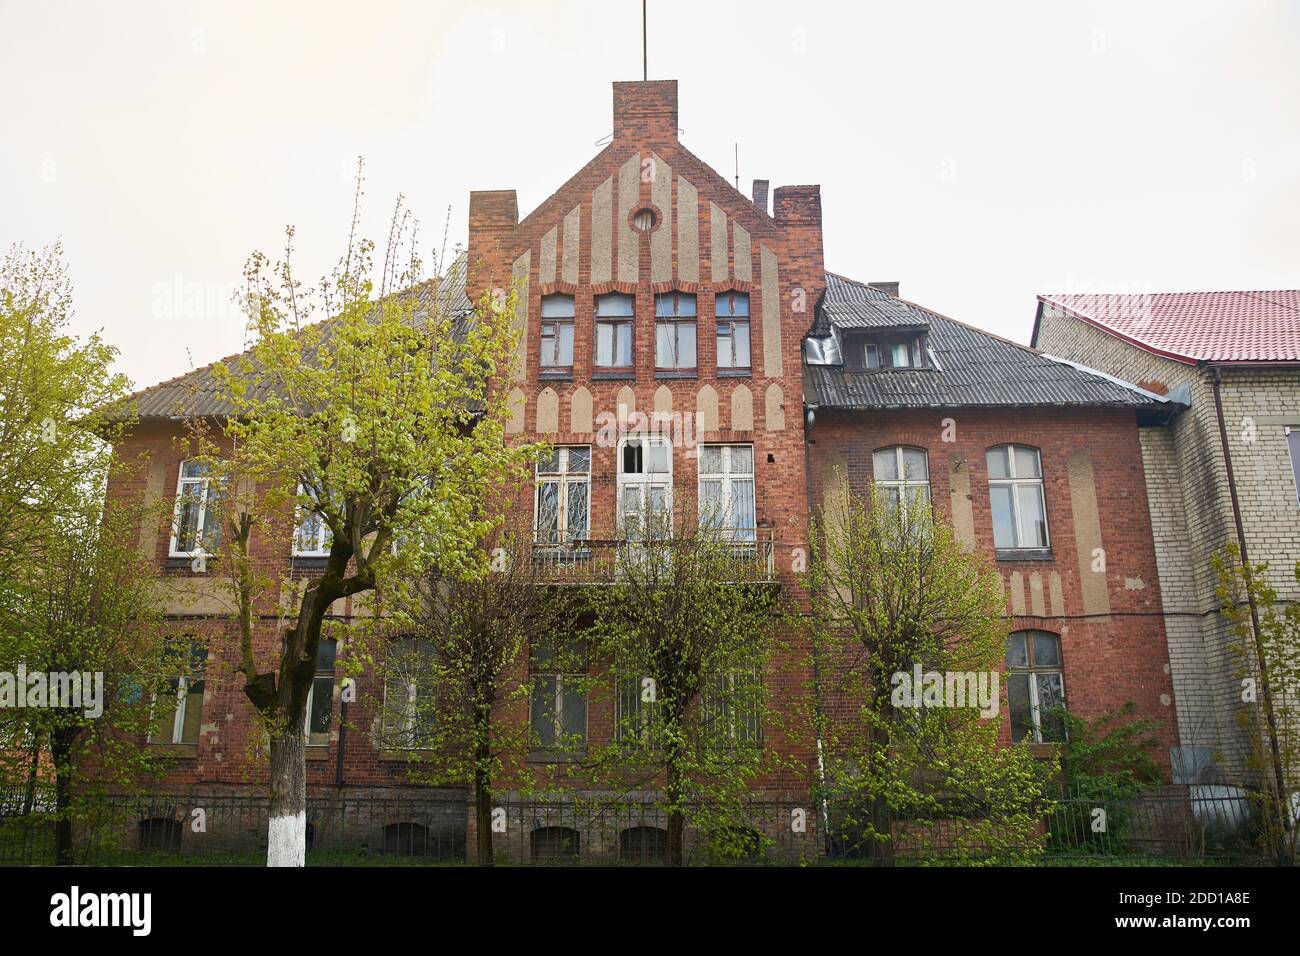 Gusev, Kaliningrad Region, Russia - May 2, 2020: Historical buildings of the city of Gusev. Stock Photo